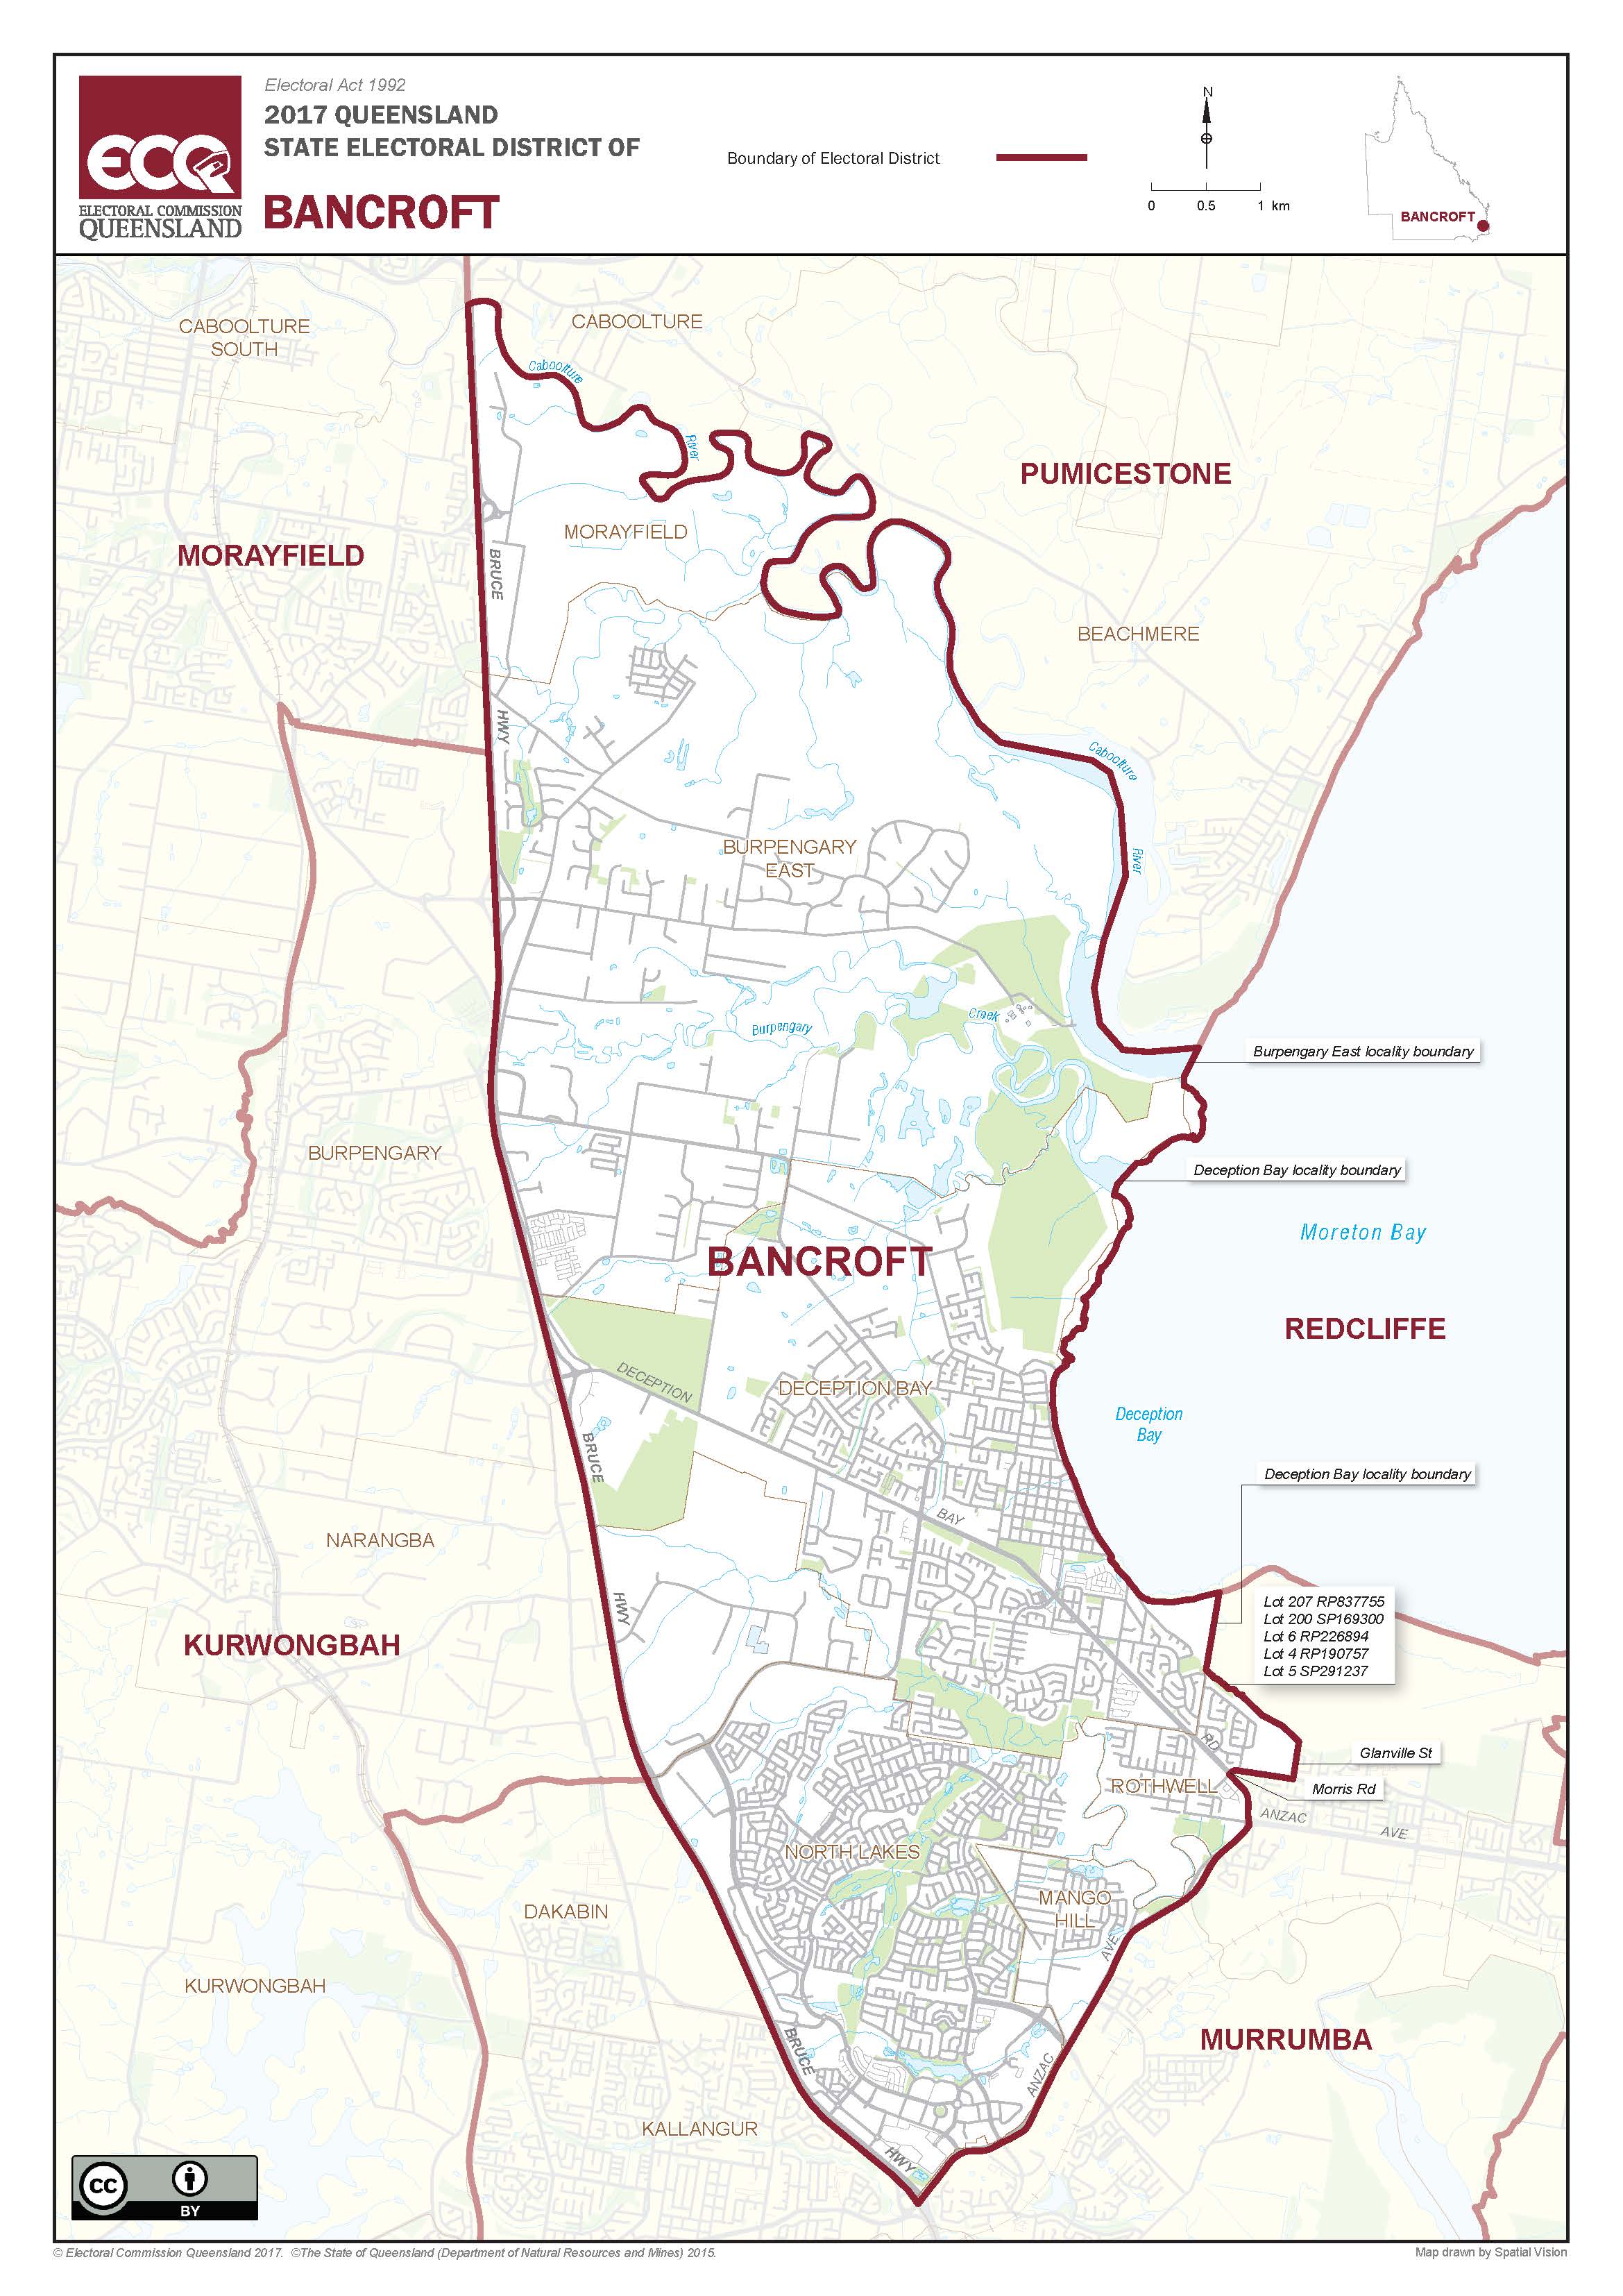 Boundary map of the Bancroft electorate